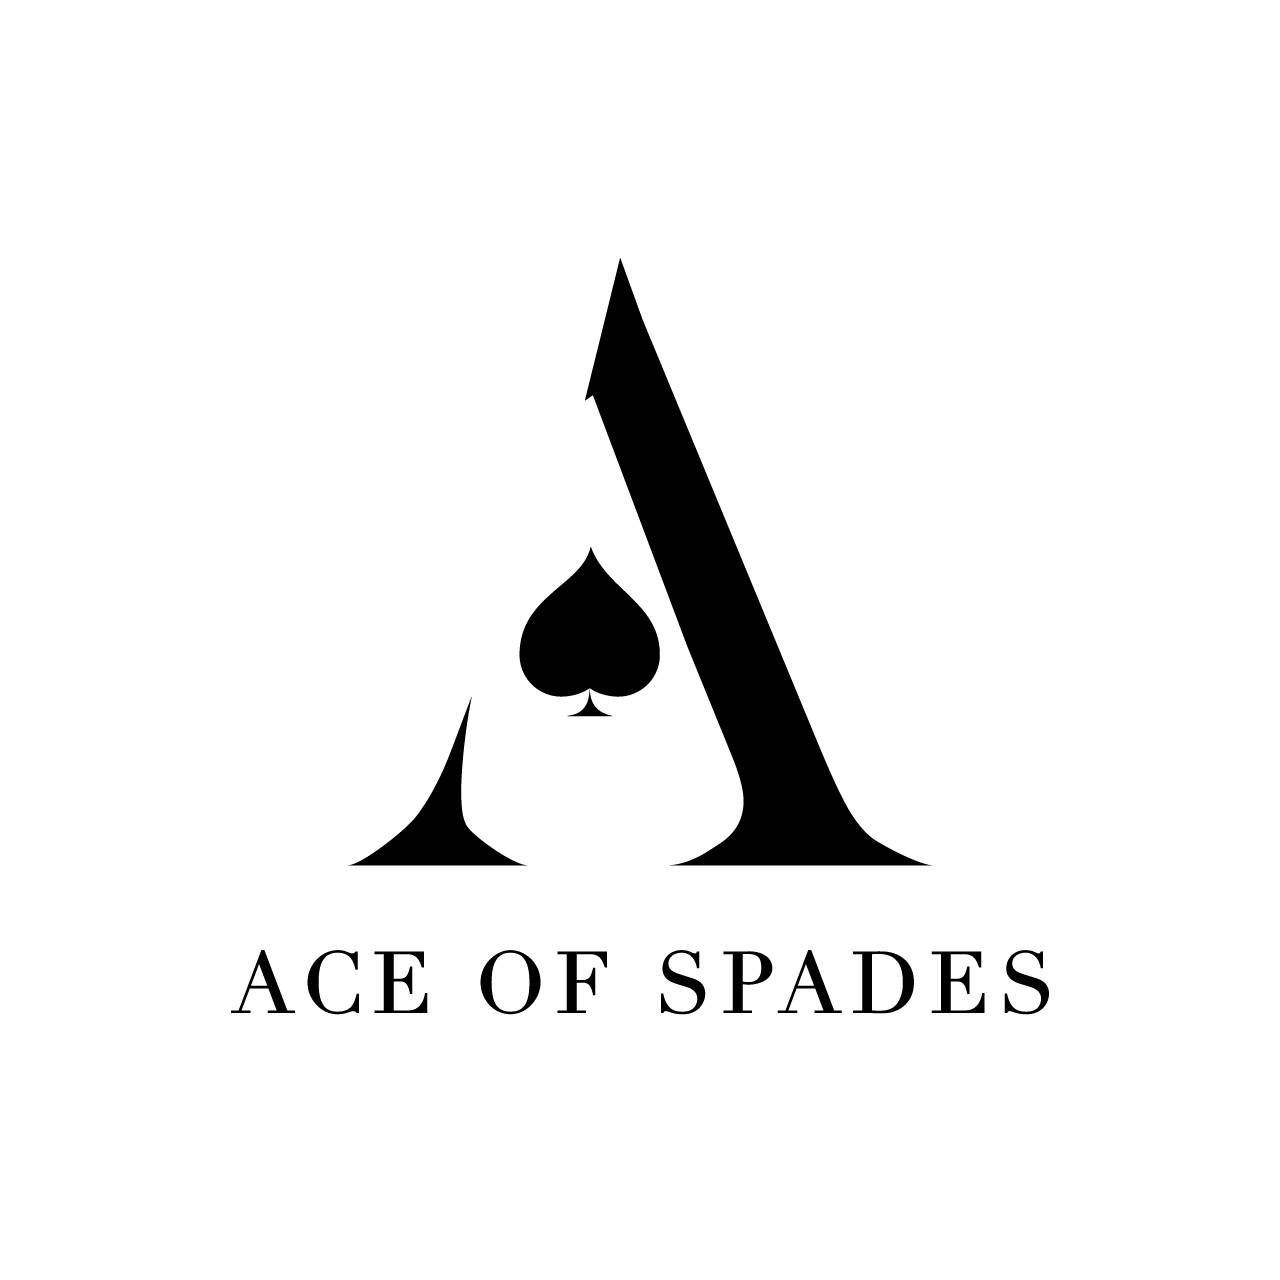 Ace Of Spades PR Becoming The Go-To Agency For Thought Leadership